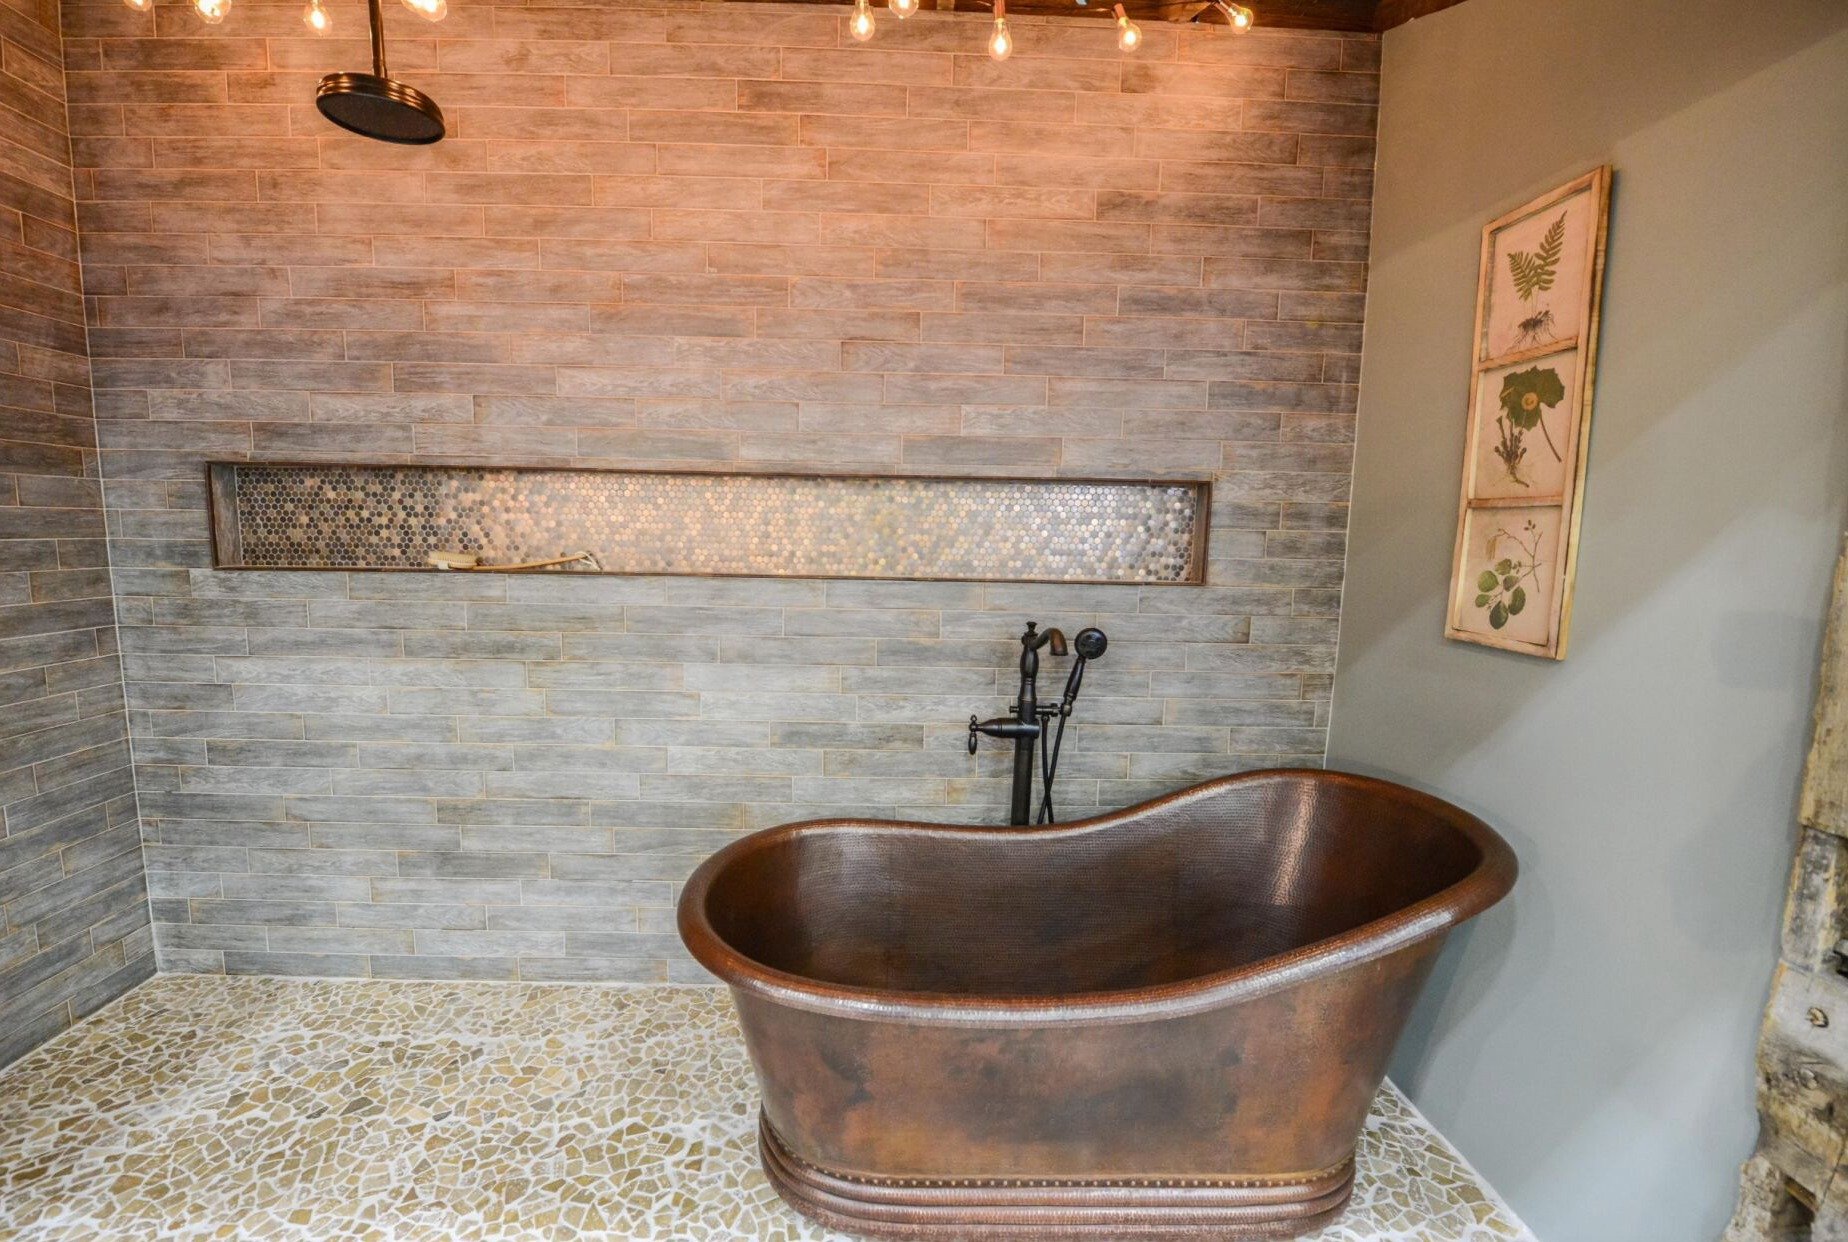  From plumbers to flooring and tile, the bath of your dreams can become a reality when you talk to an on-site expert. 